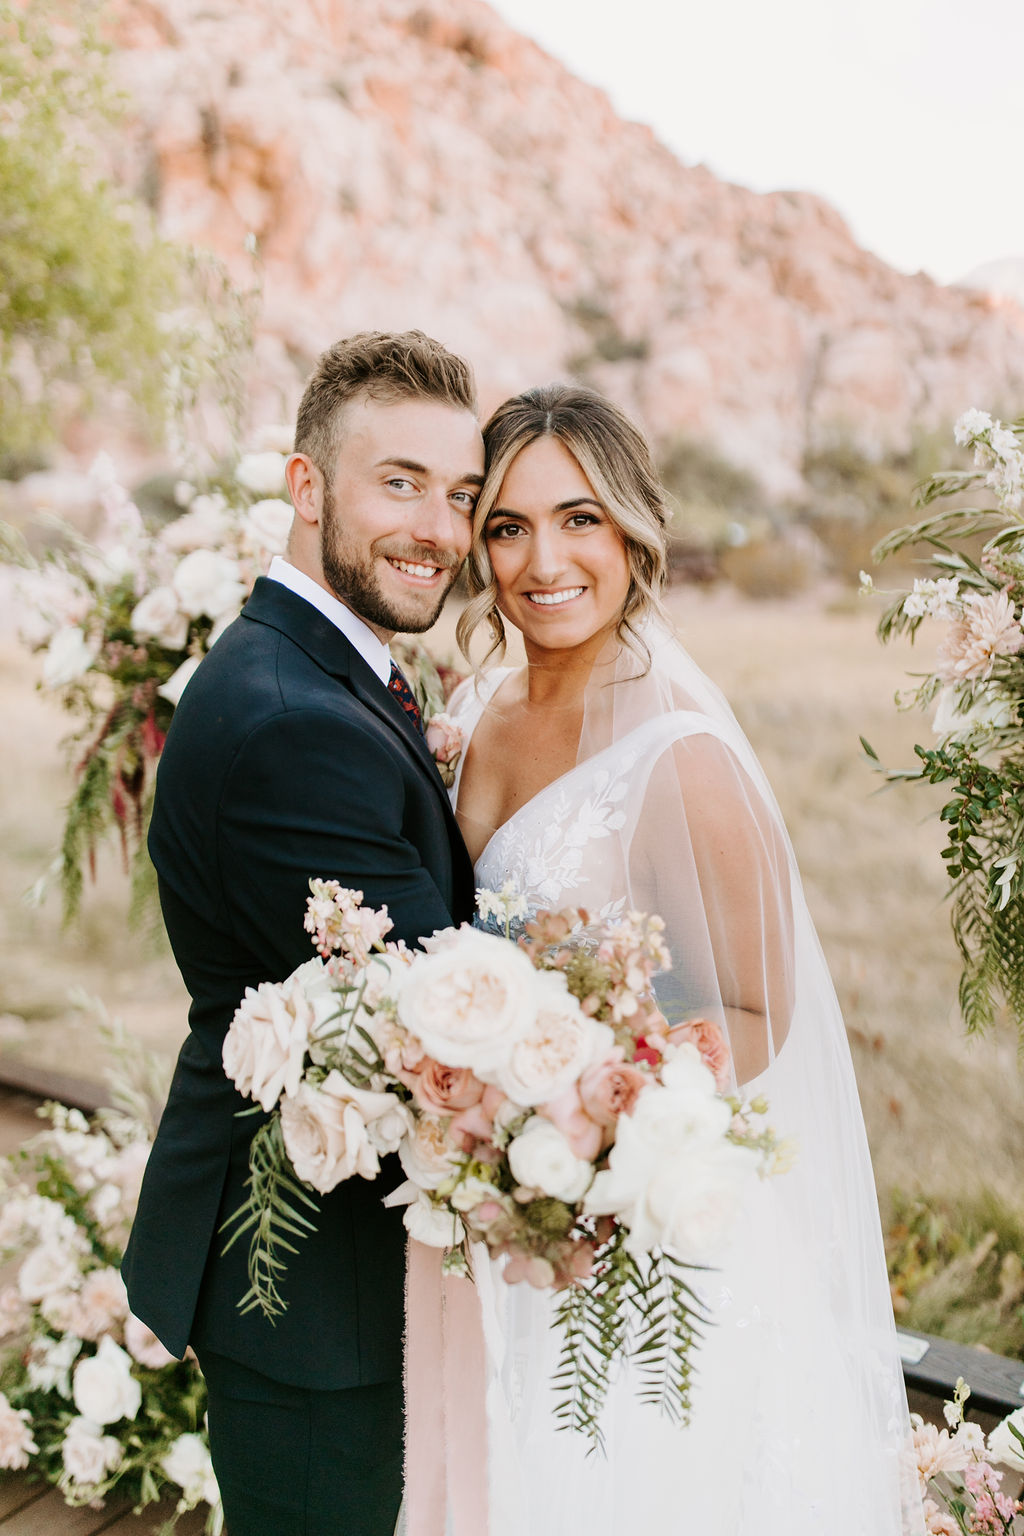 Bride and Groom Smiling for Newlywed photos for Romantic Desert & Backyard Micro-Wedding